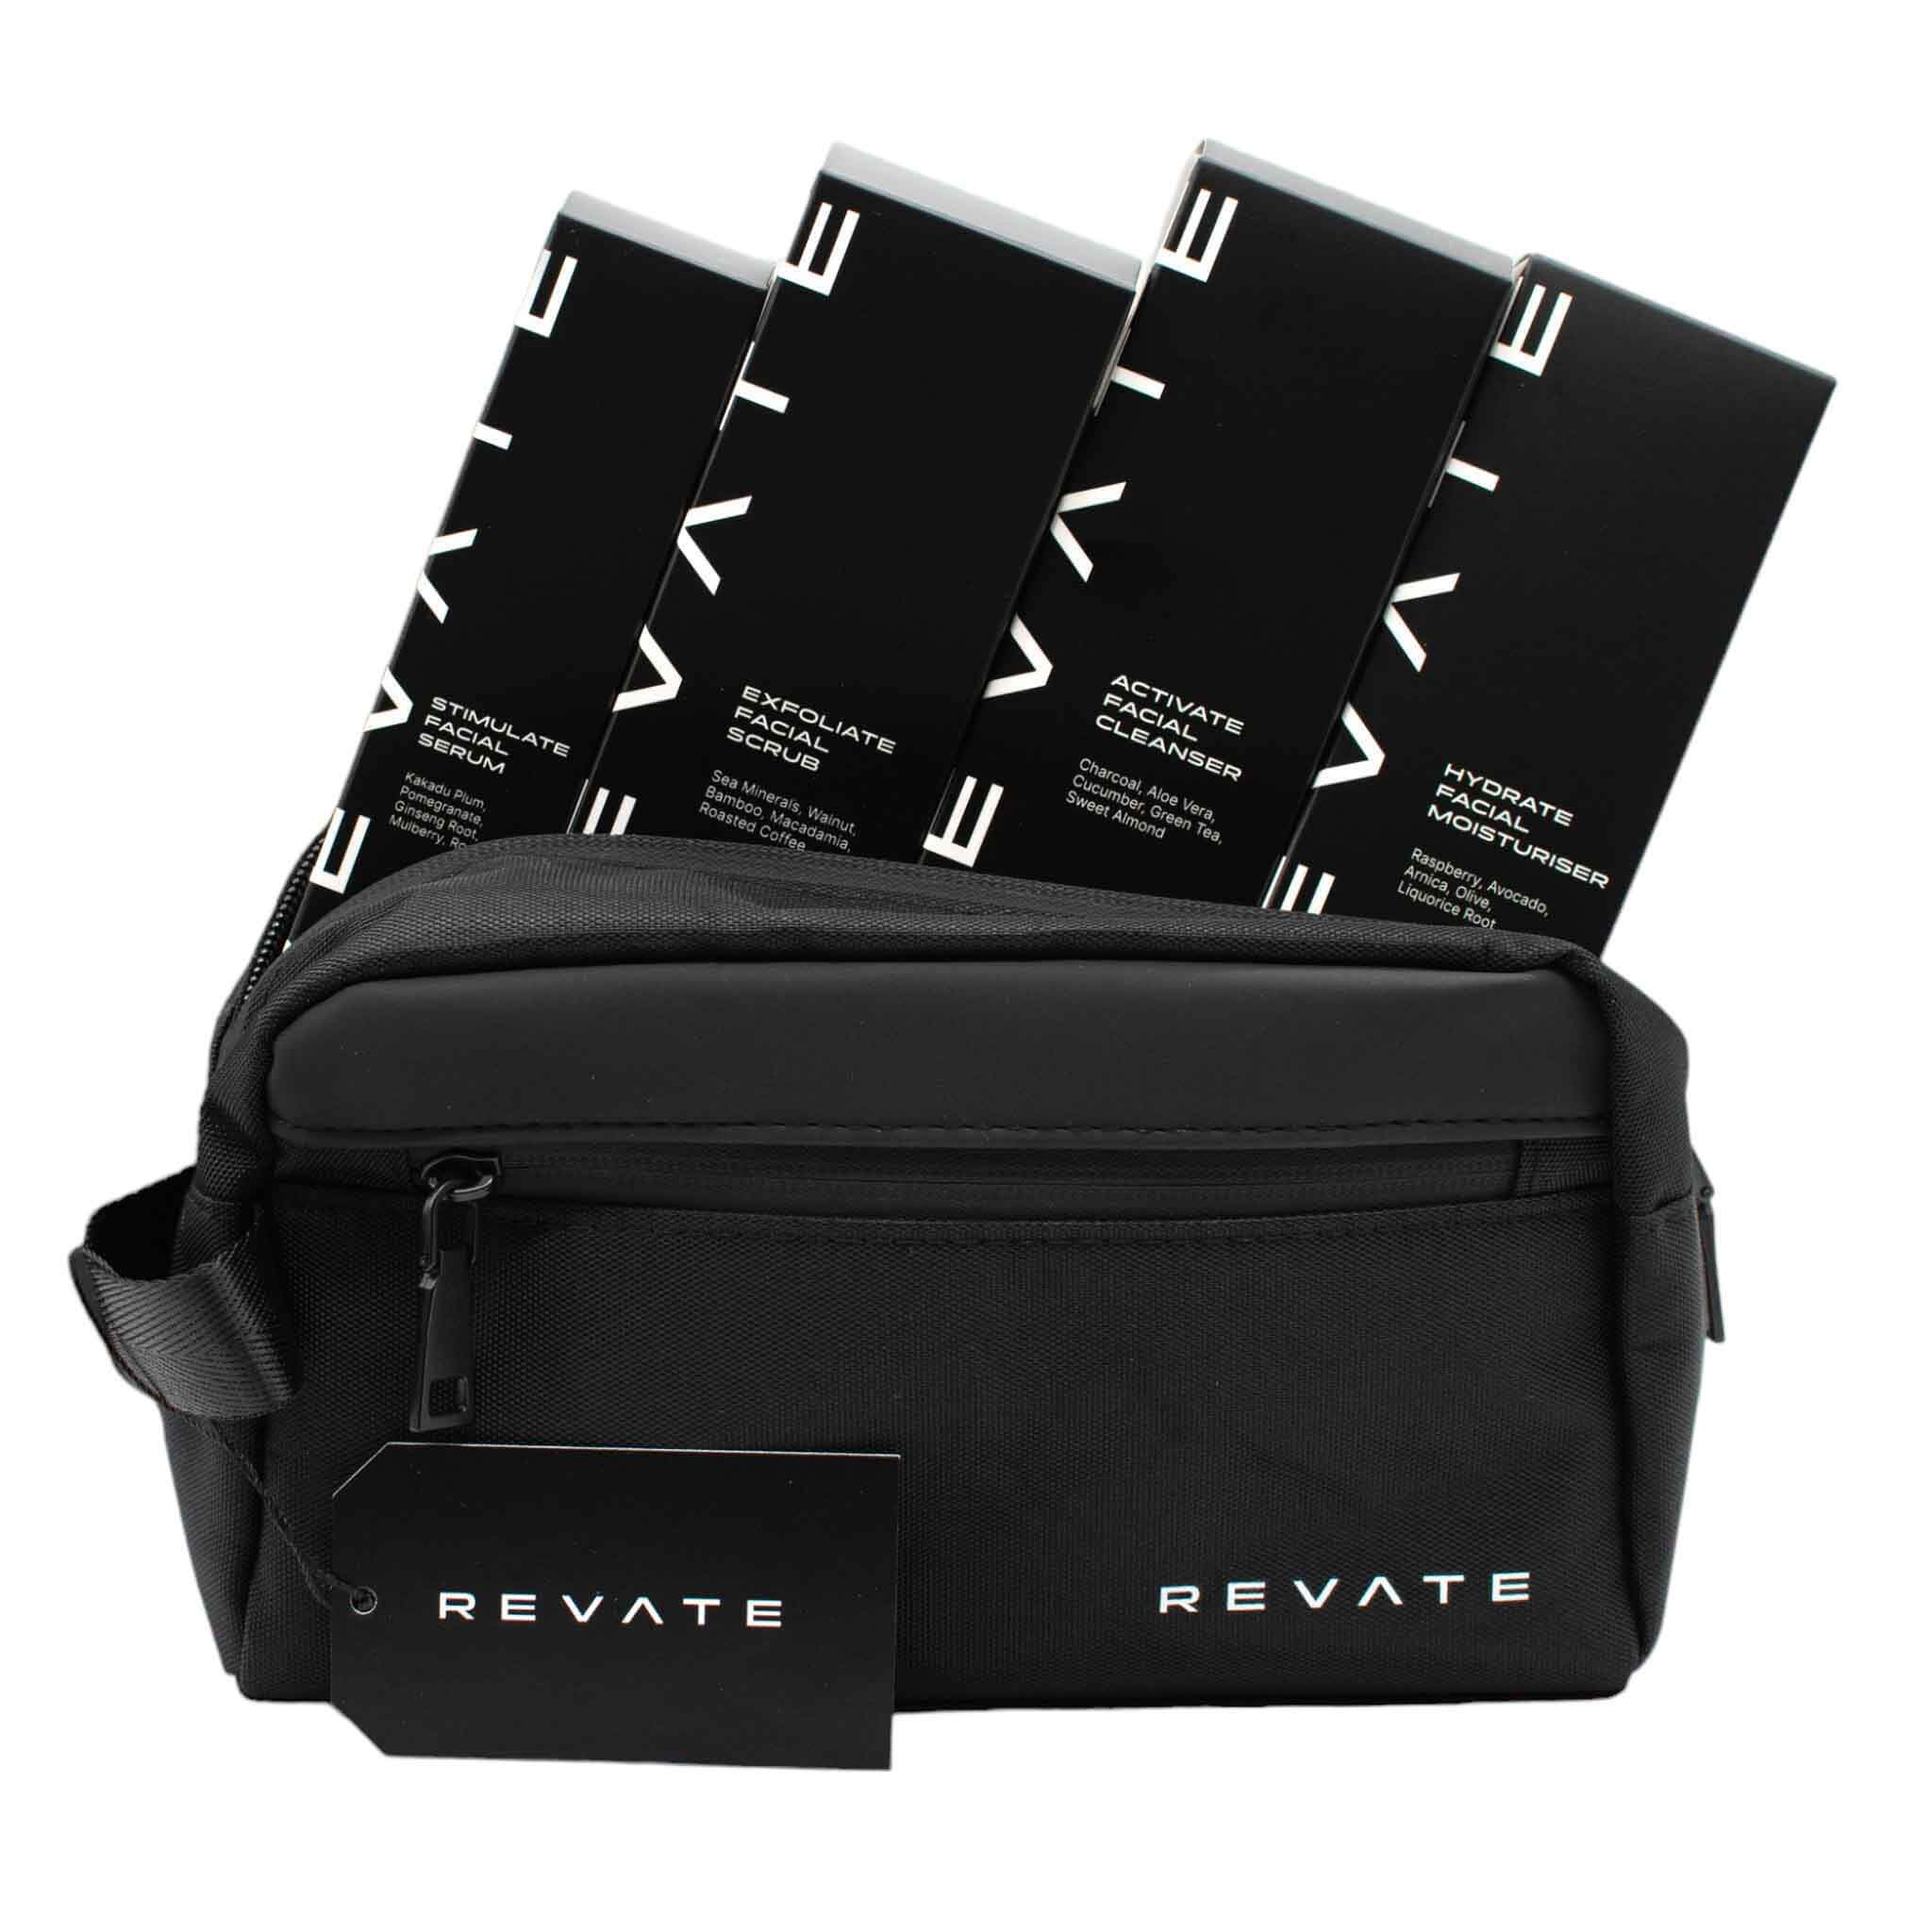 Revate skin complete collection with all products and included travel bag